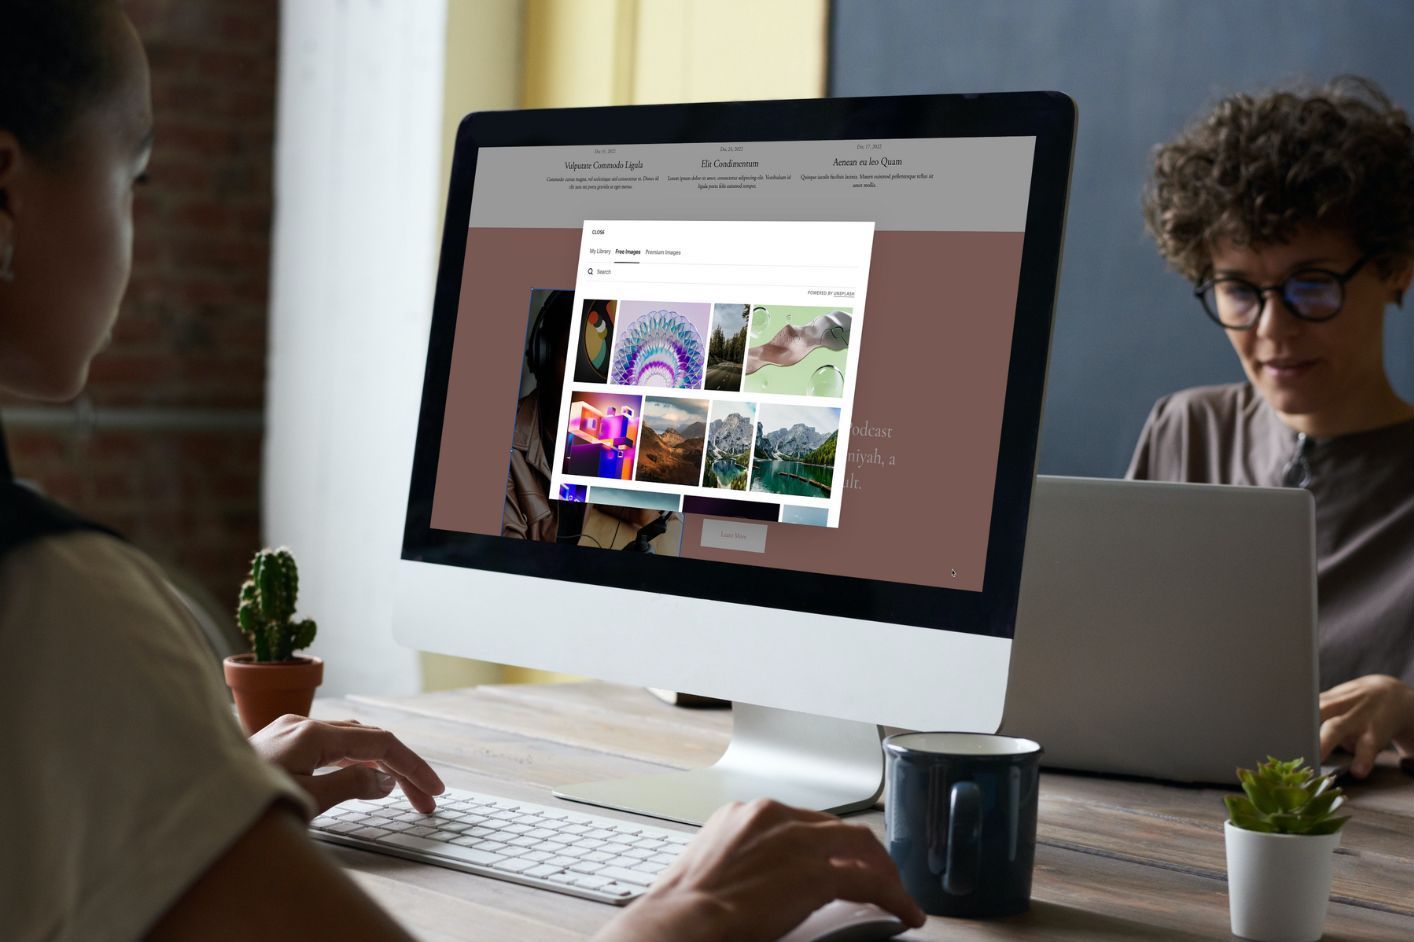 Squarespace image library